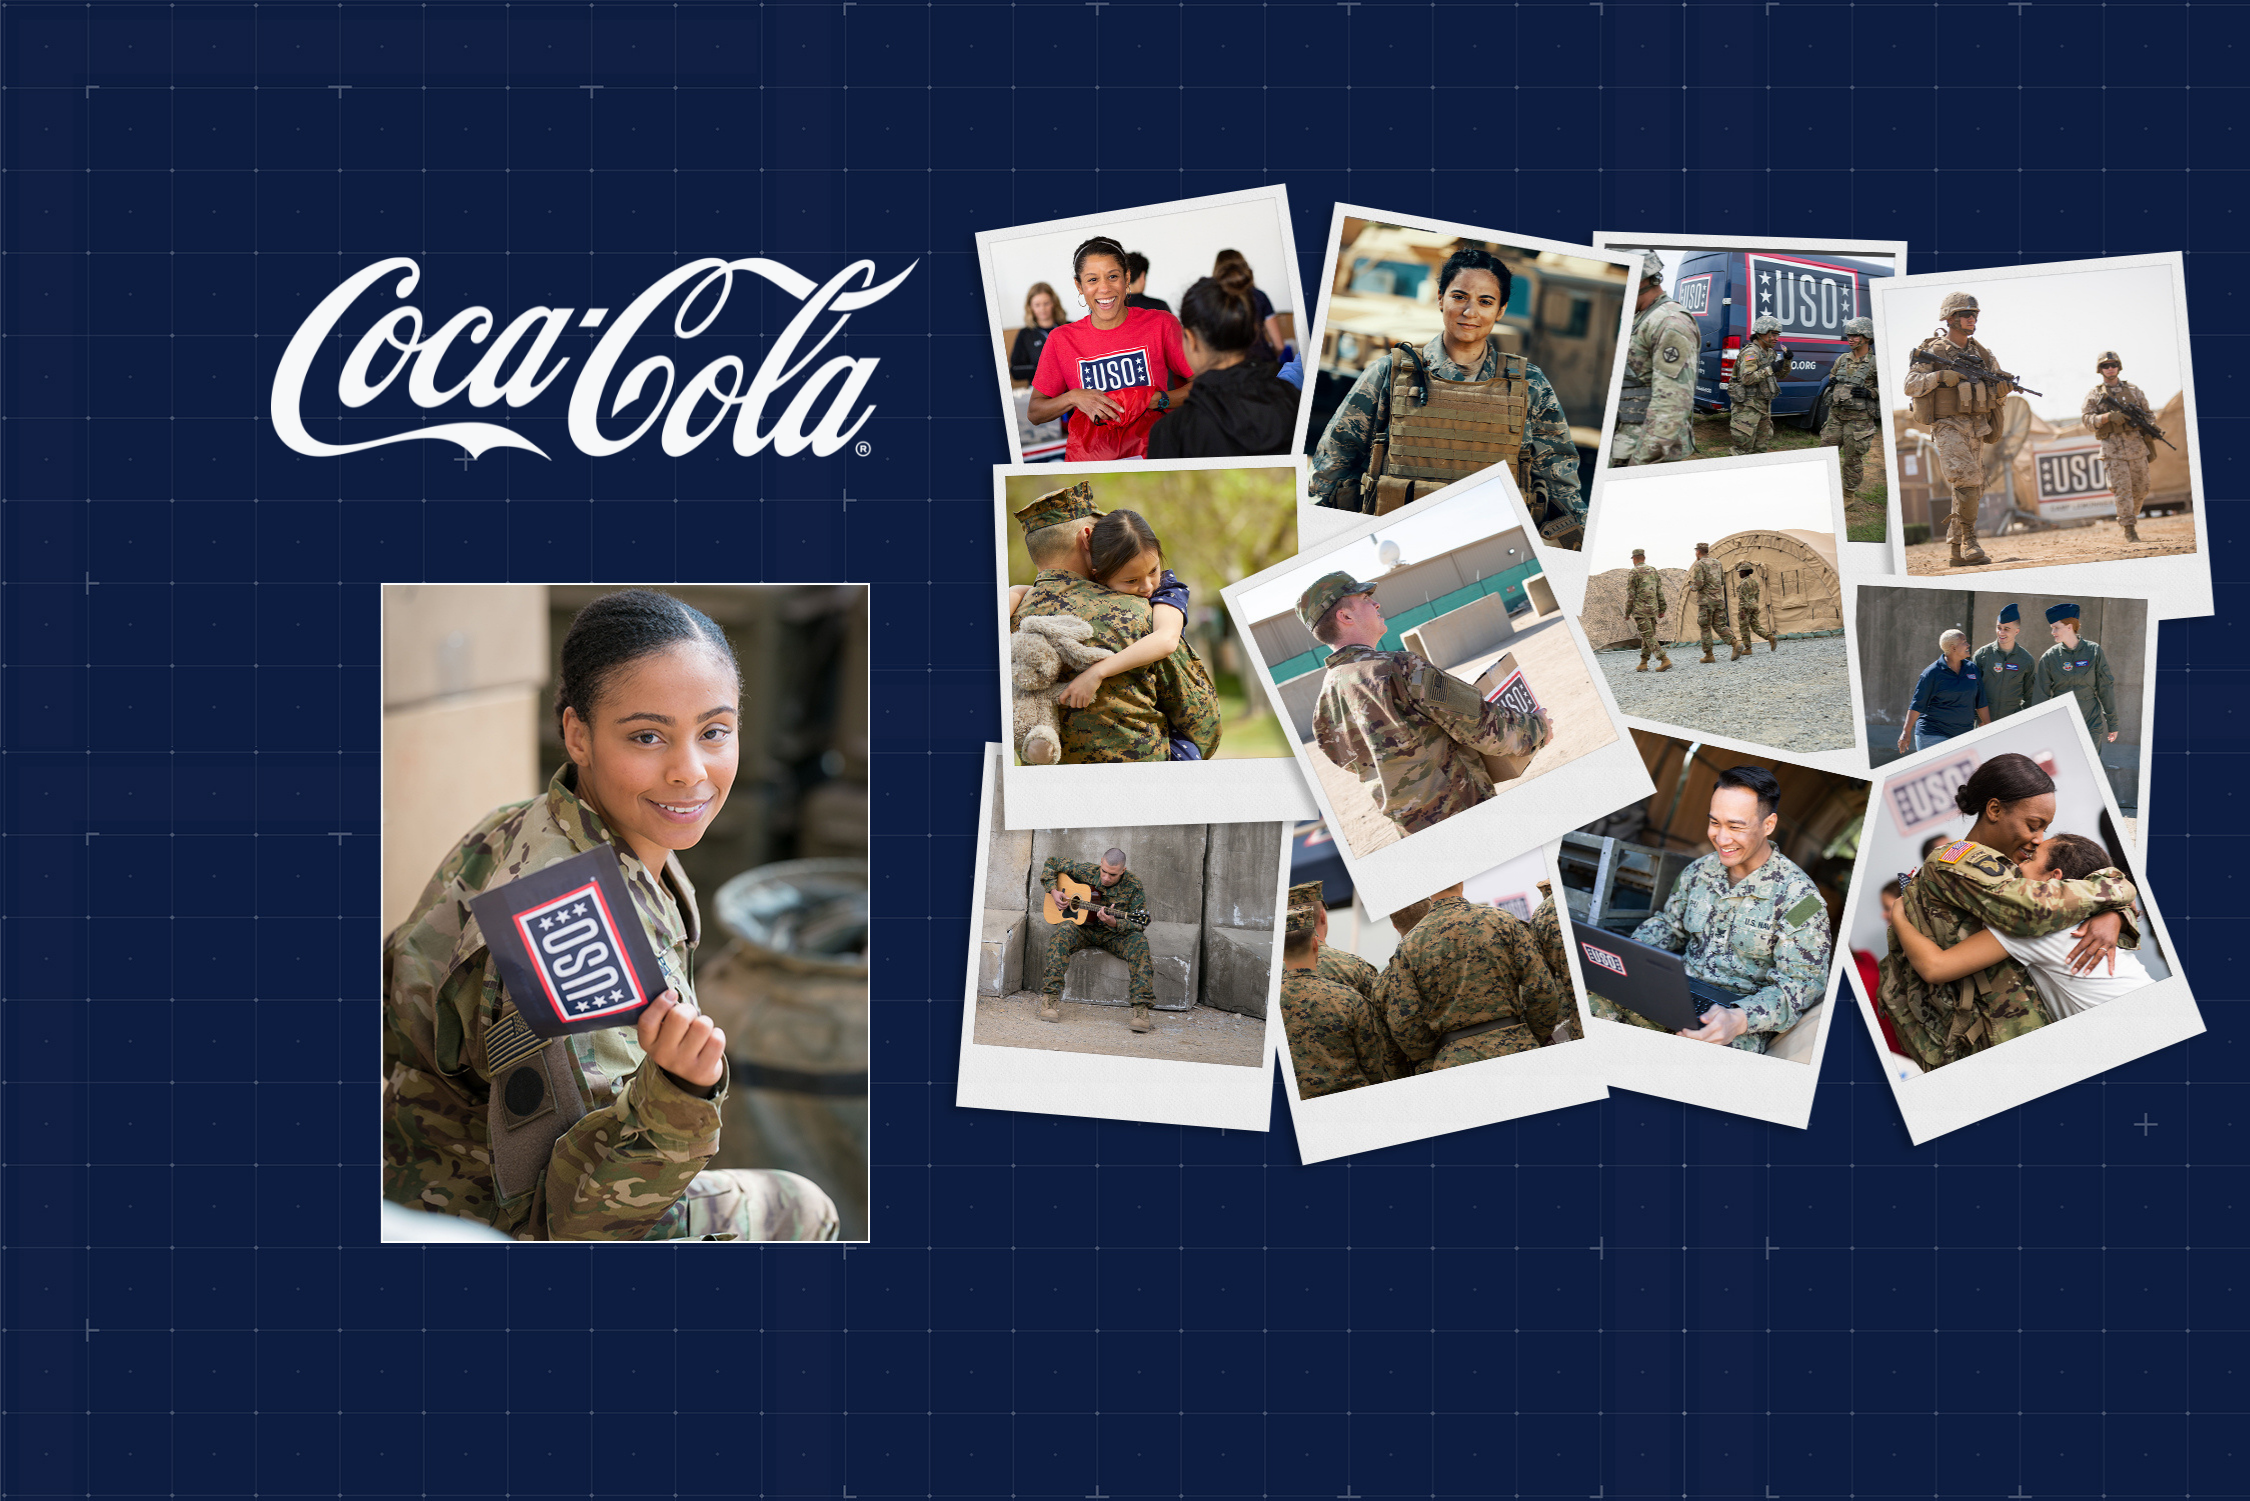 Images of soldiers recieving messages of support form USO.